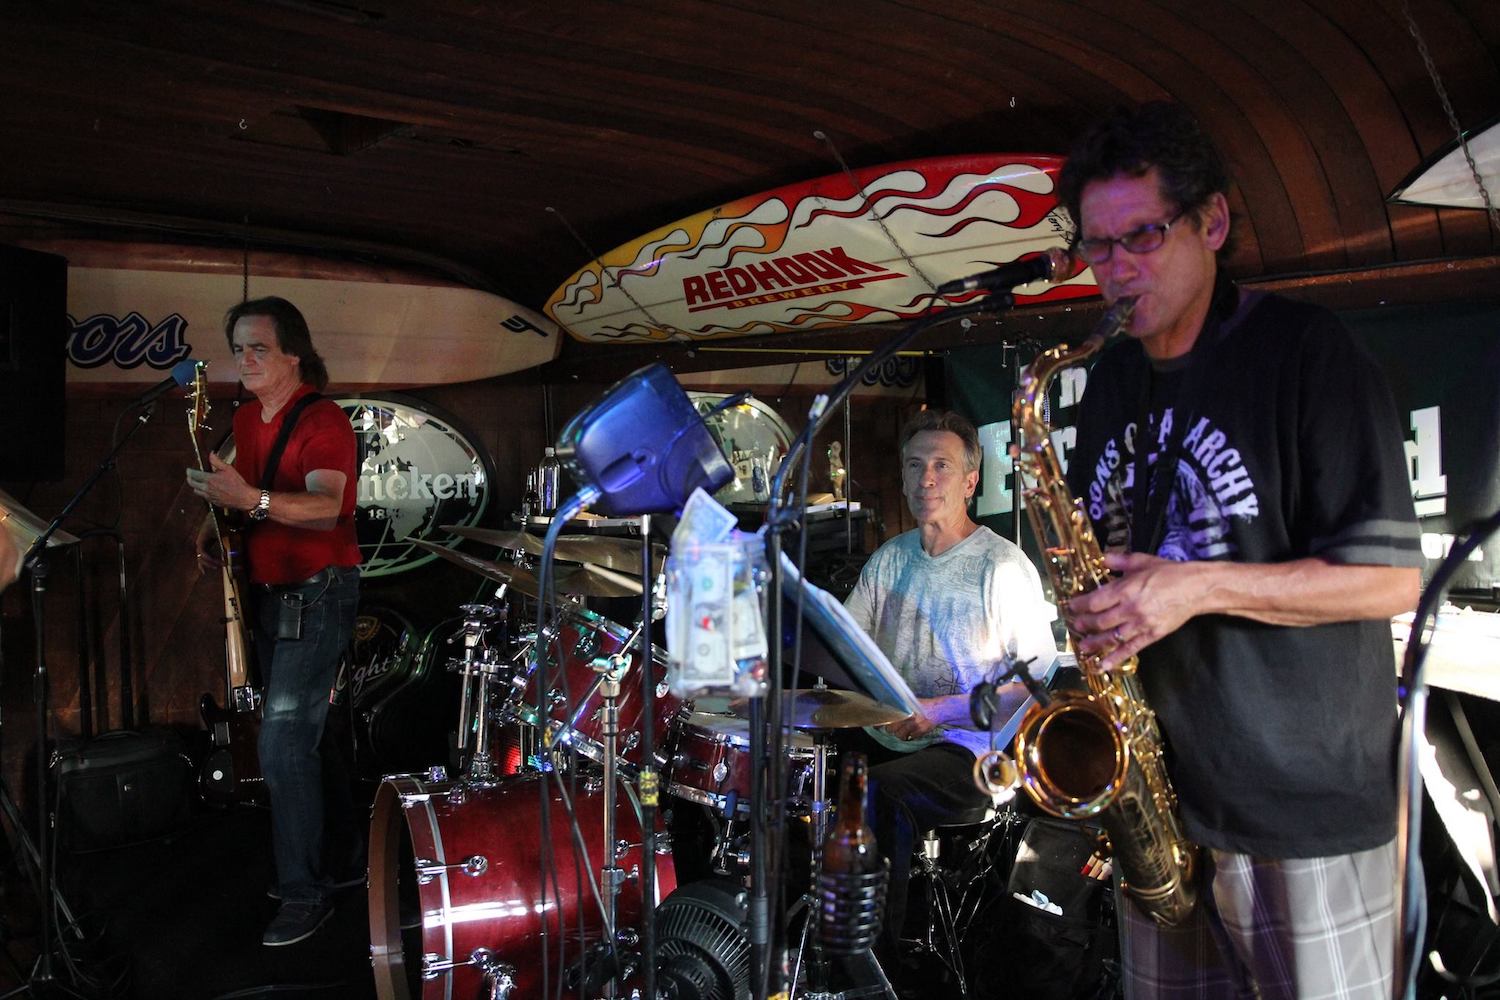 San Diego live music bar The Kraken in Encinitas featuring a jazz band performing 